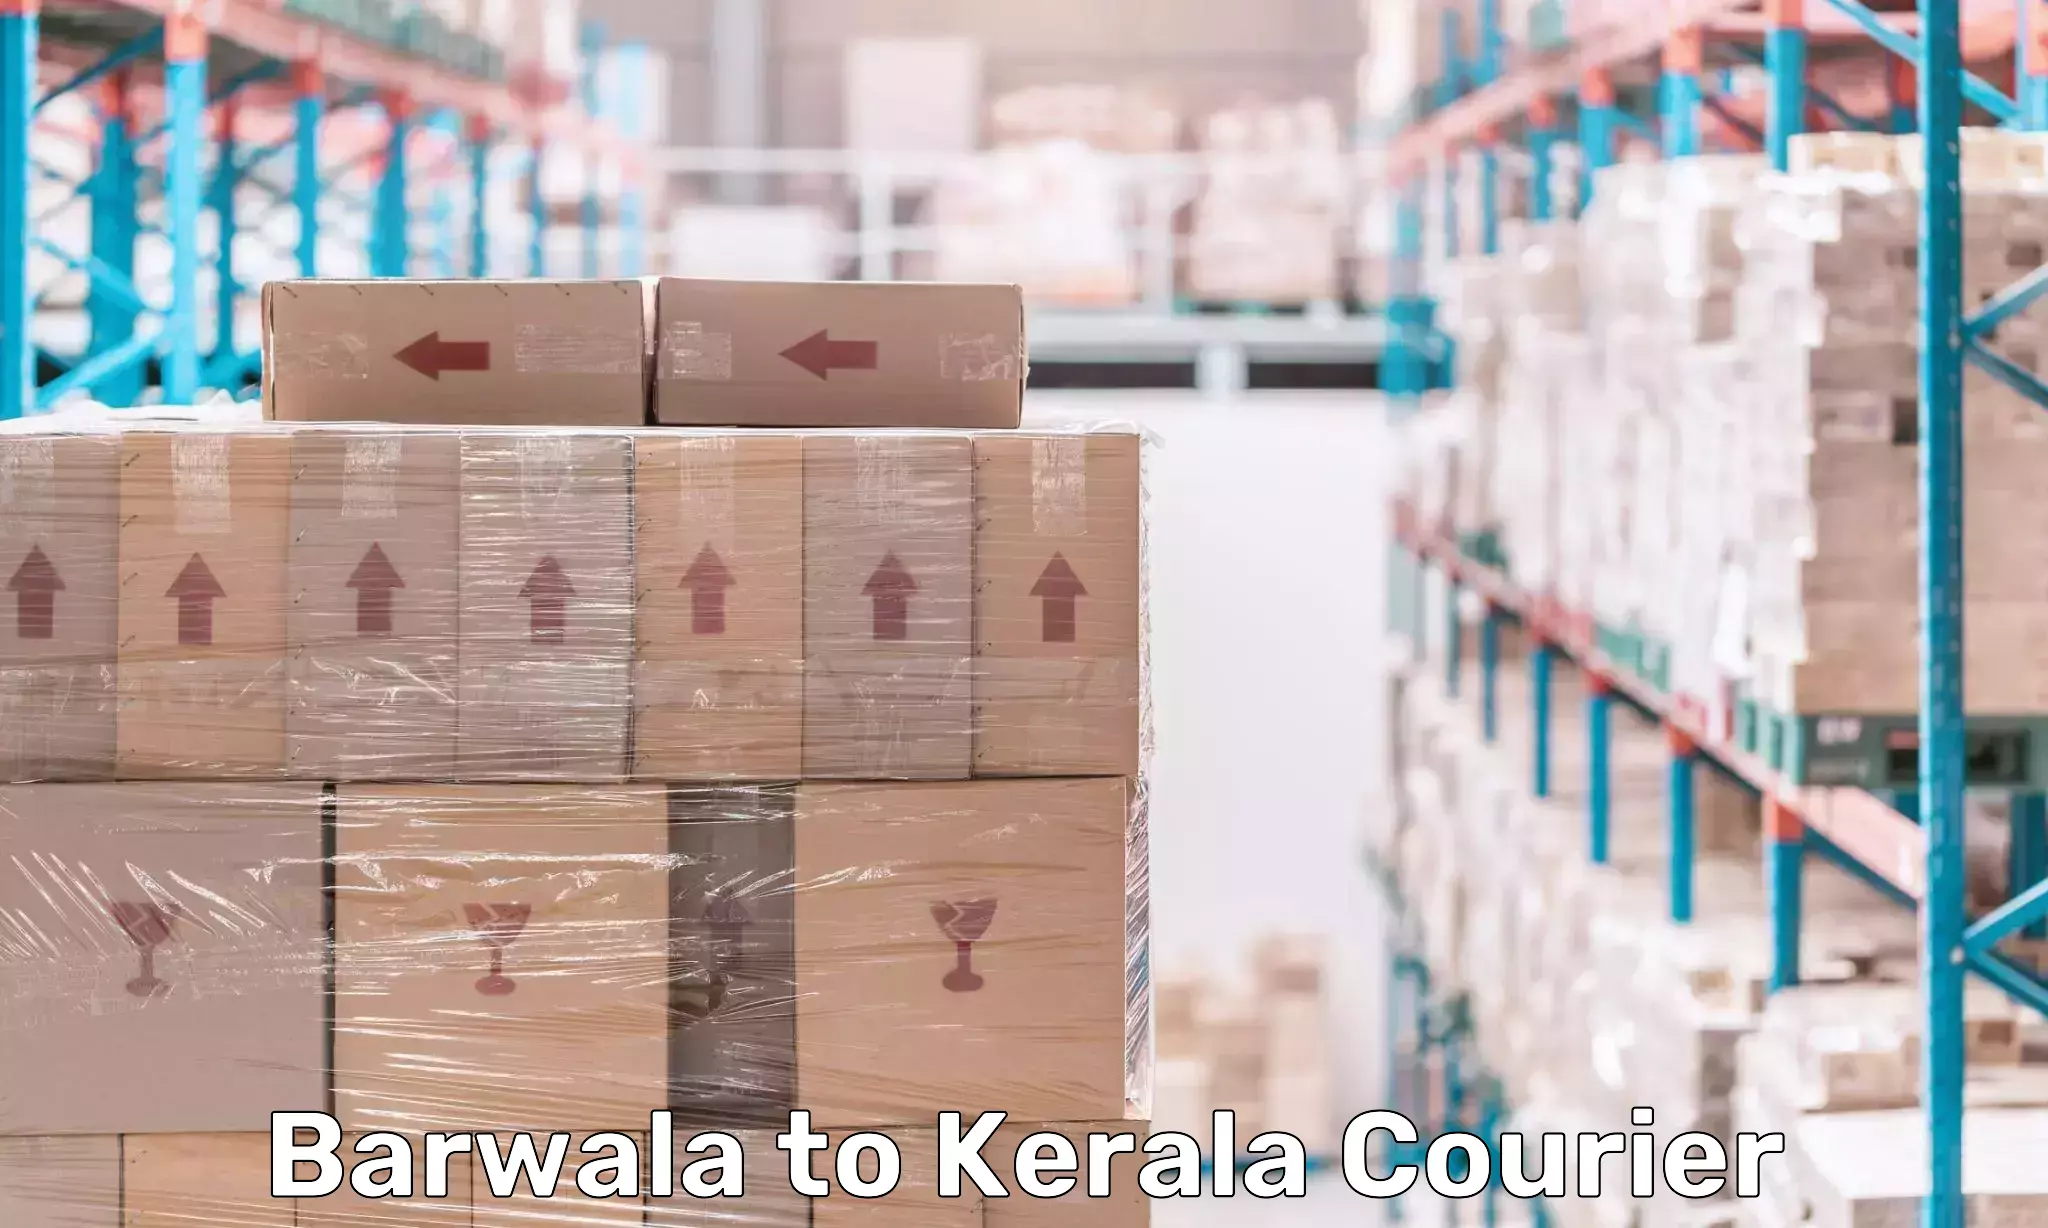 Cash on delivery service Barwala to Kerala